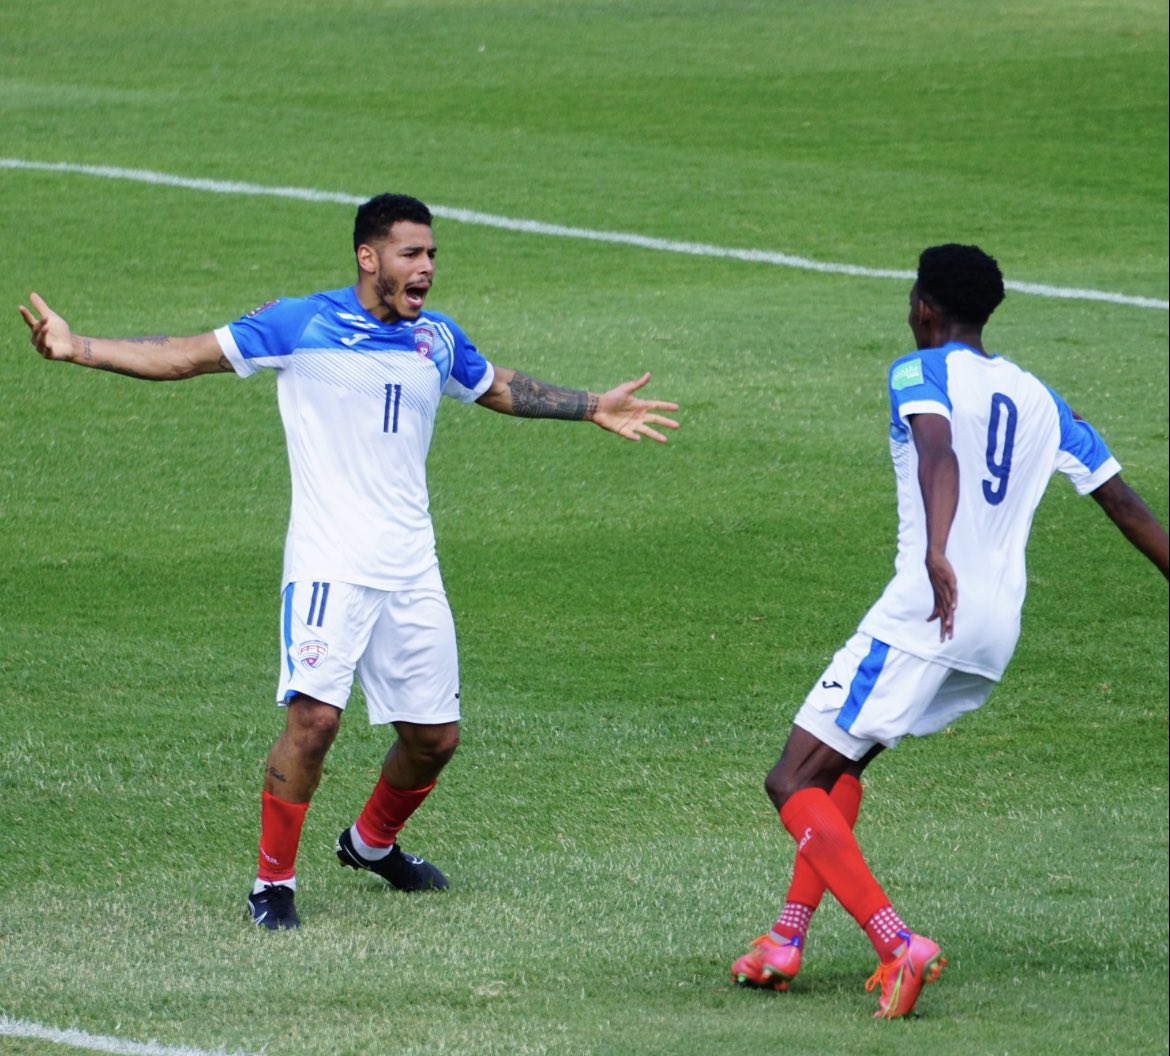 Cuba goal: Qualify for World Cup in the next decade